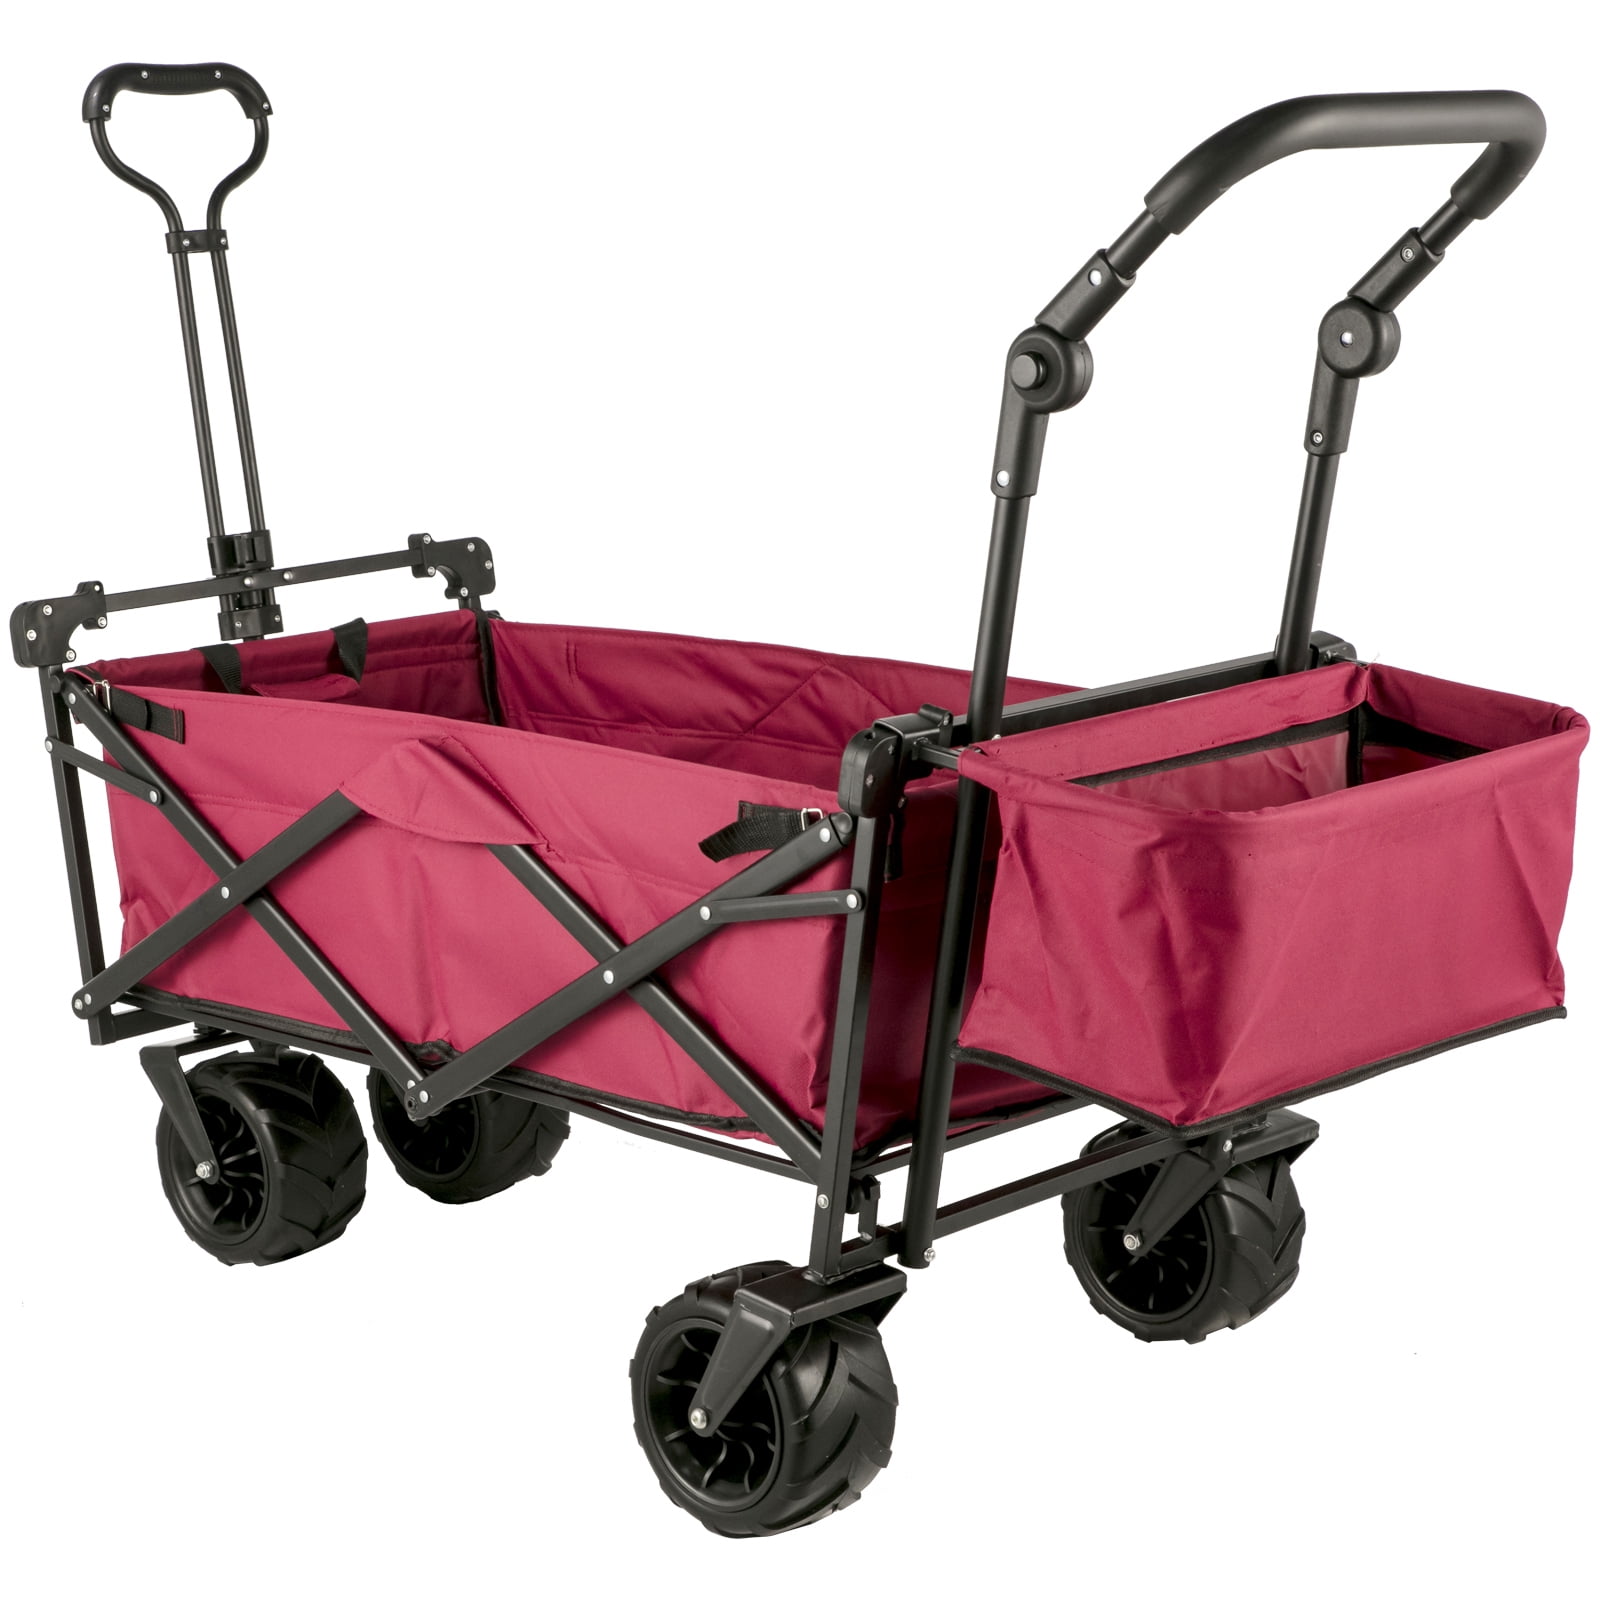 Happybuy Collapsible Wagon Cart Red Garden Collapsible Wagon Oversized Wheels Portable Folding Wagon Adjustable Handles Foldable Wagon Cart Removable Canopy 600D Oxford Cloth for Beach Sports 